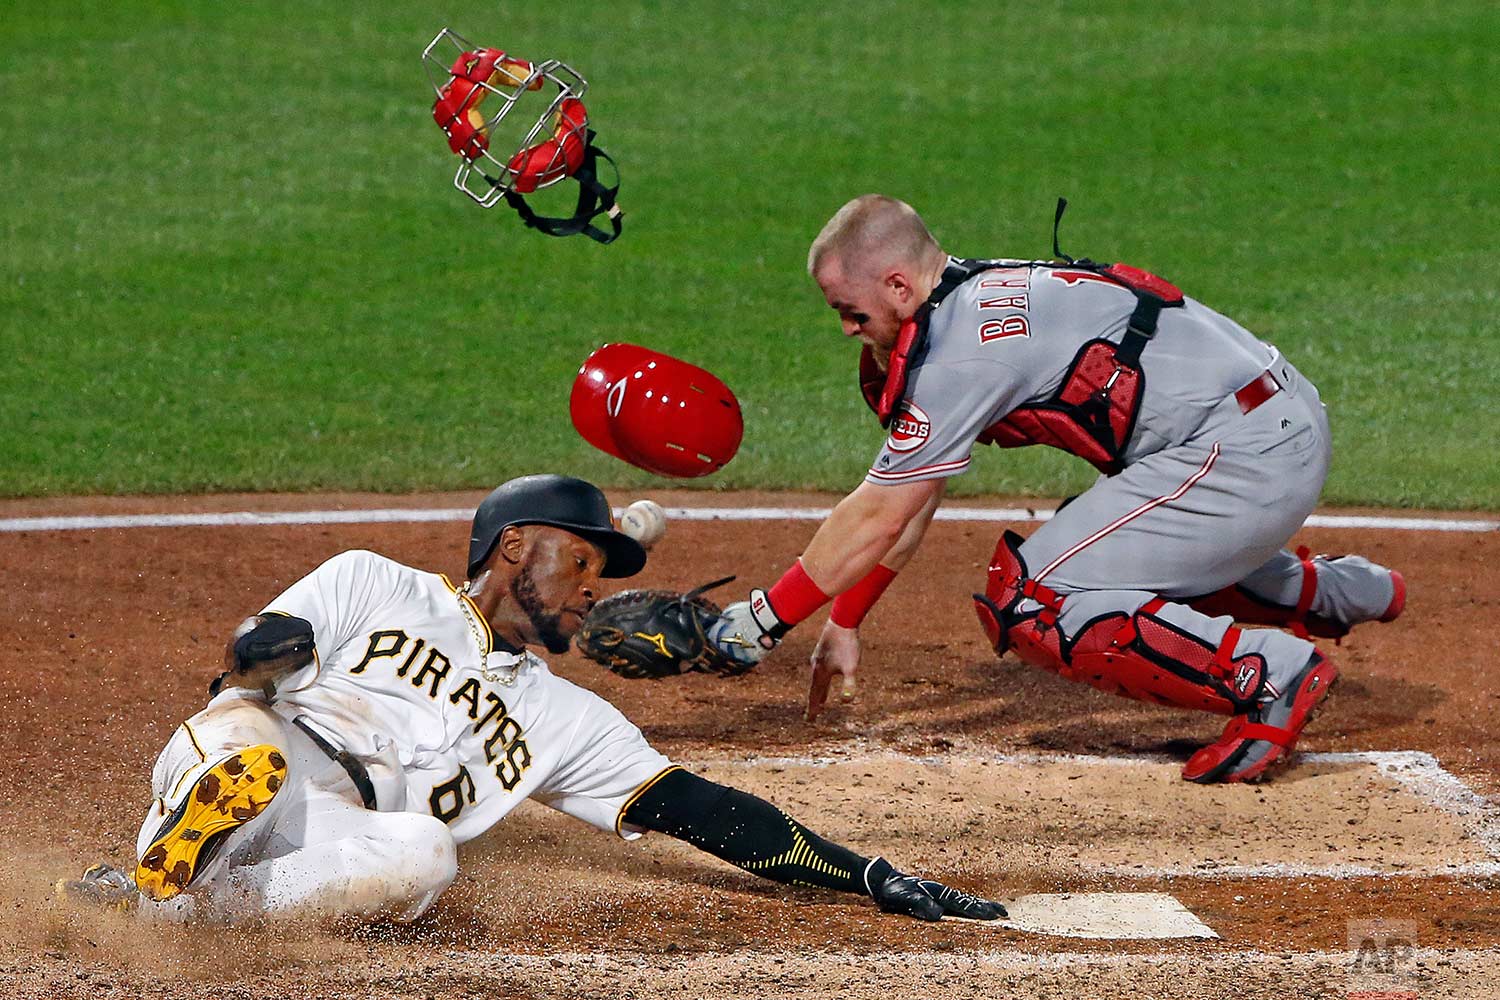  Cincinnati Reds catcher Tucker Barnhart drops the ball after tagging Pittsburgh Pirates' Starling Marte (6), who touches the plate to score the sixth inning of a baseball game in Pittsburgh, Wednesday, Aug. 2, 2017. (AP Photo/Gene J. Puskar) 